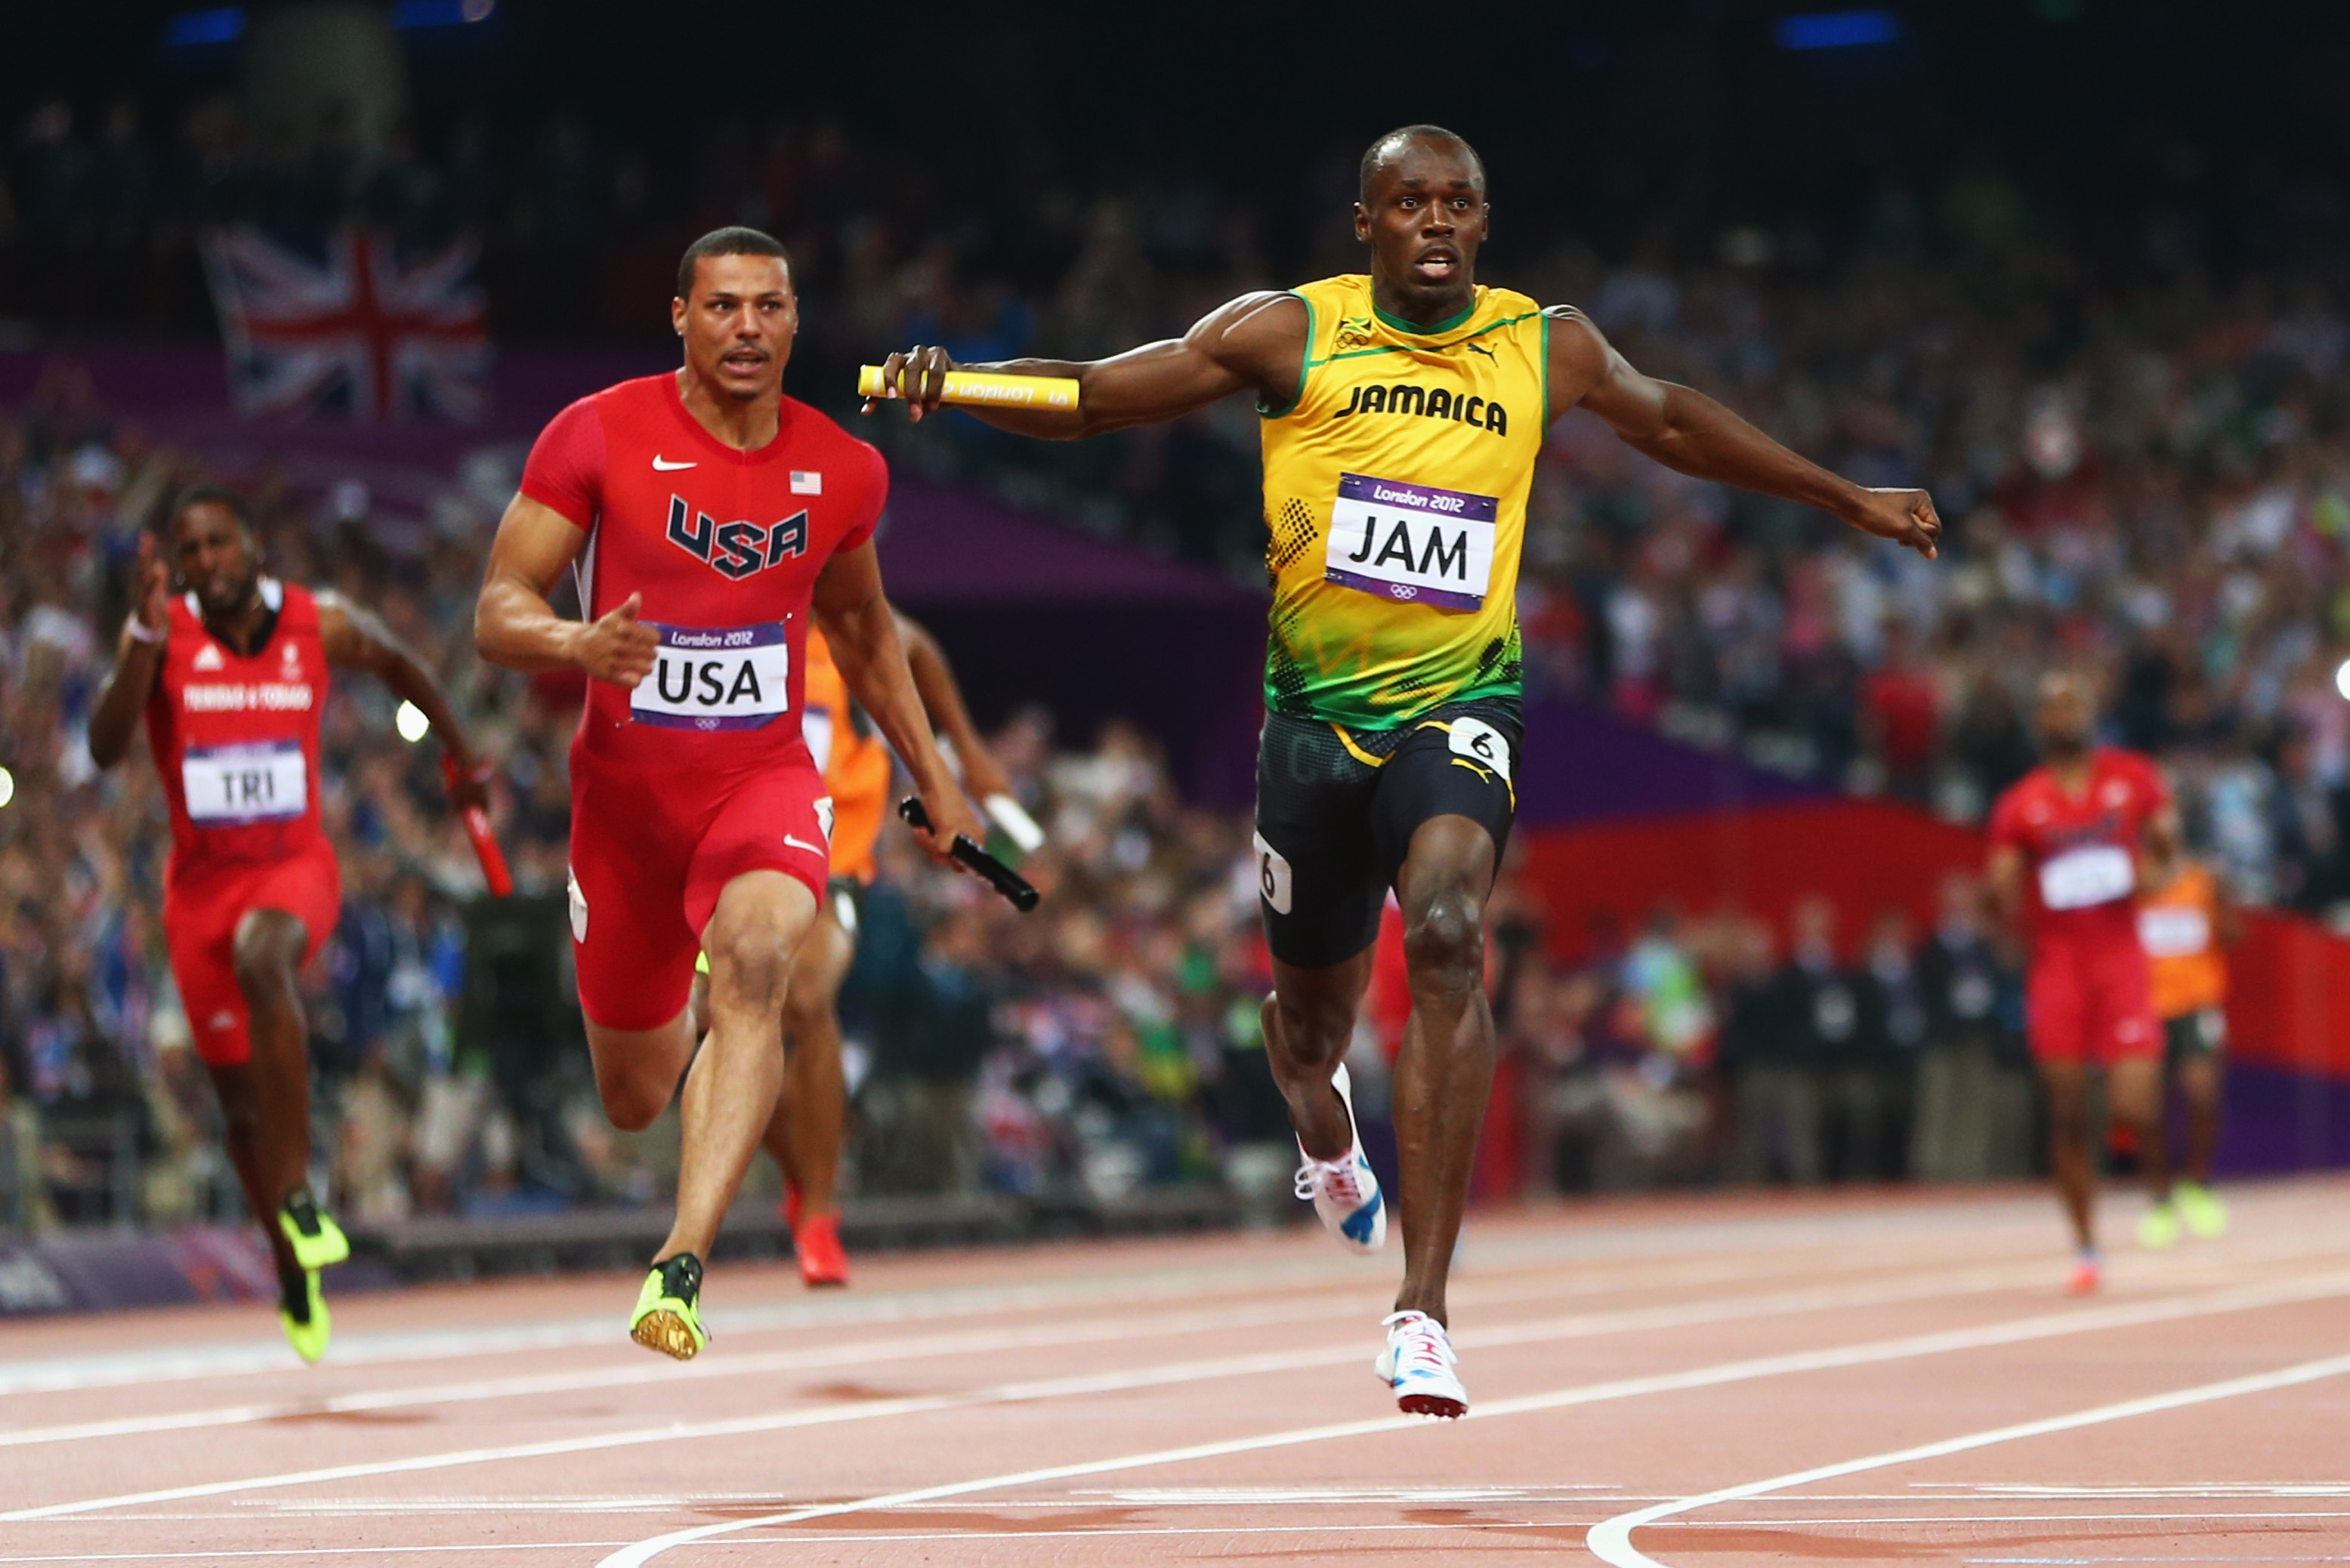 Usain Bolt MPH: Breaking Down Amazing Speed from Olympic ...